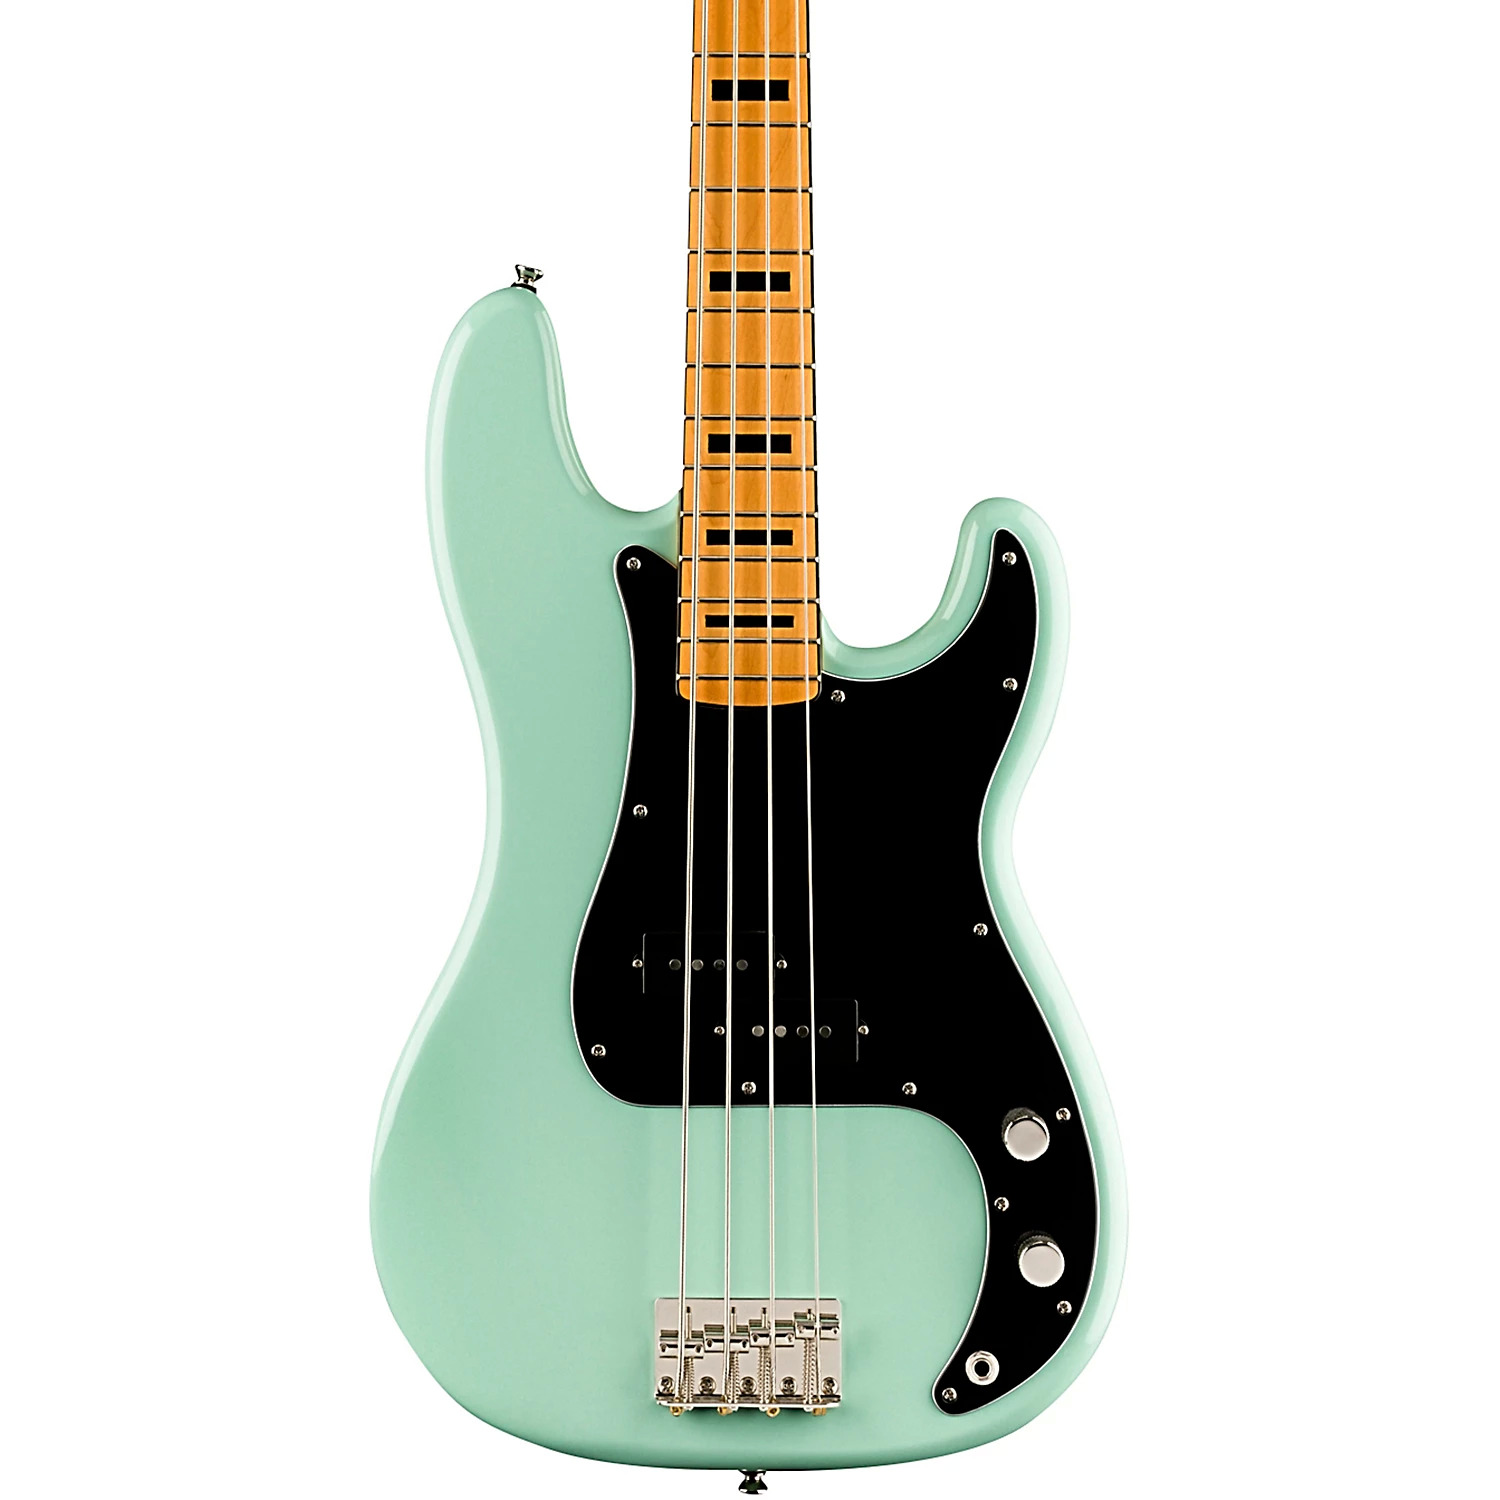 Squier Classic Vibe '70s Precision Bass guitar Surf Green 04/03 only $299